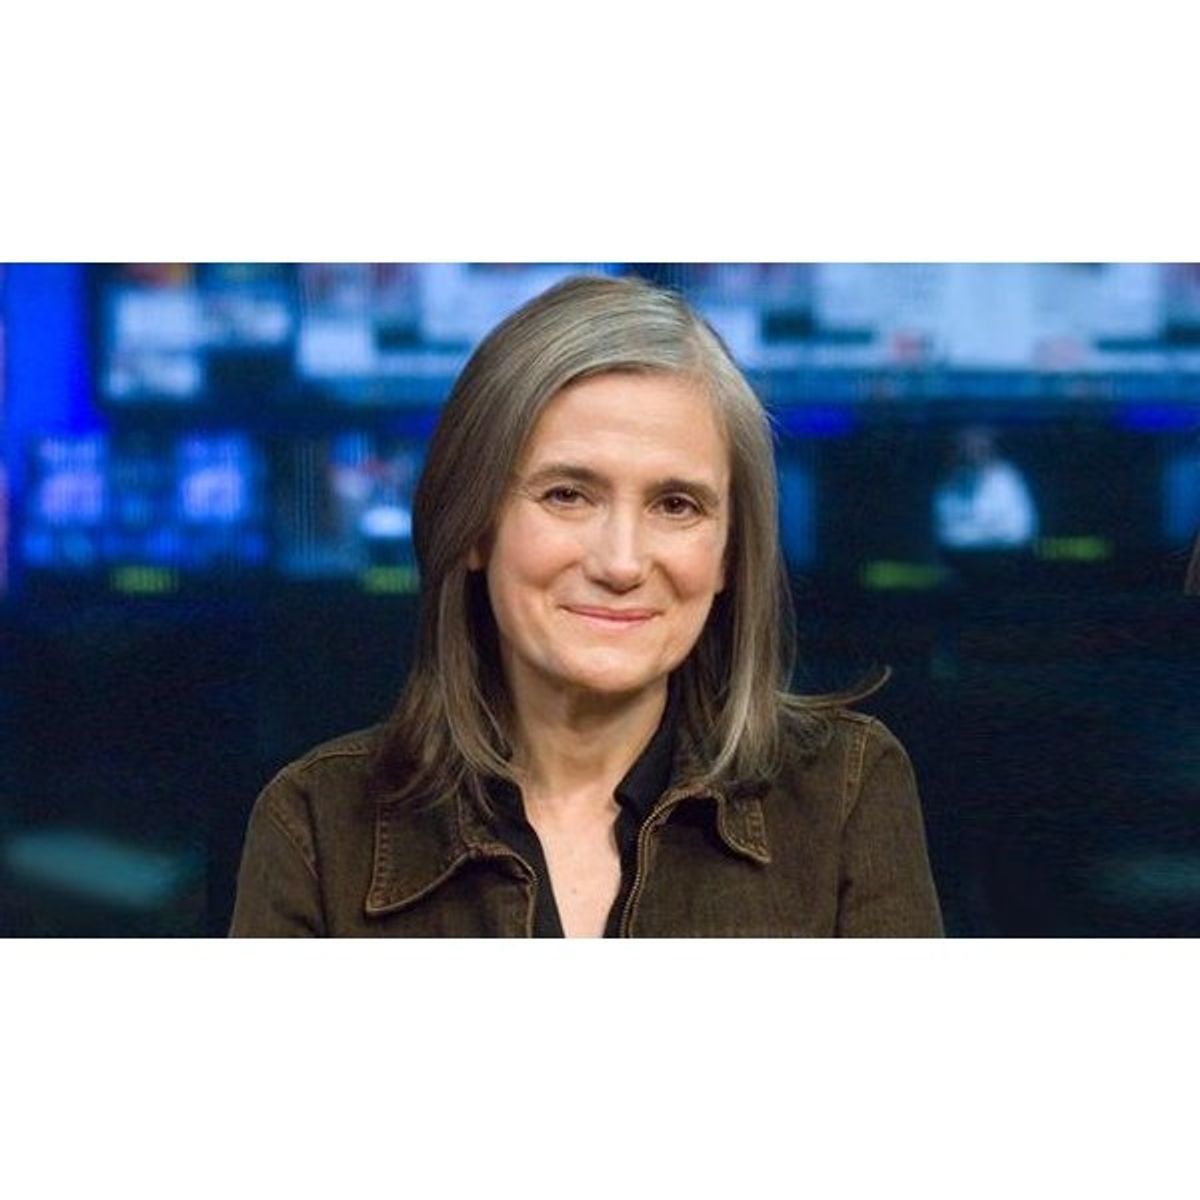 Amy Goodman Is Facing Prison Time For Reporting On The Dakota Access Pipeline